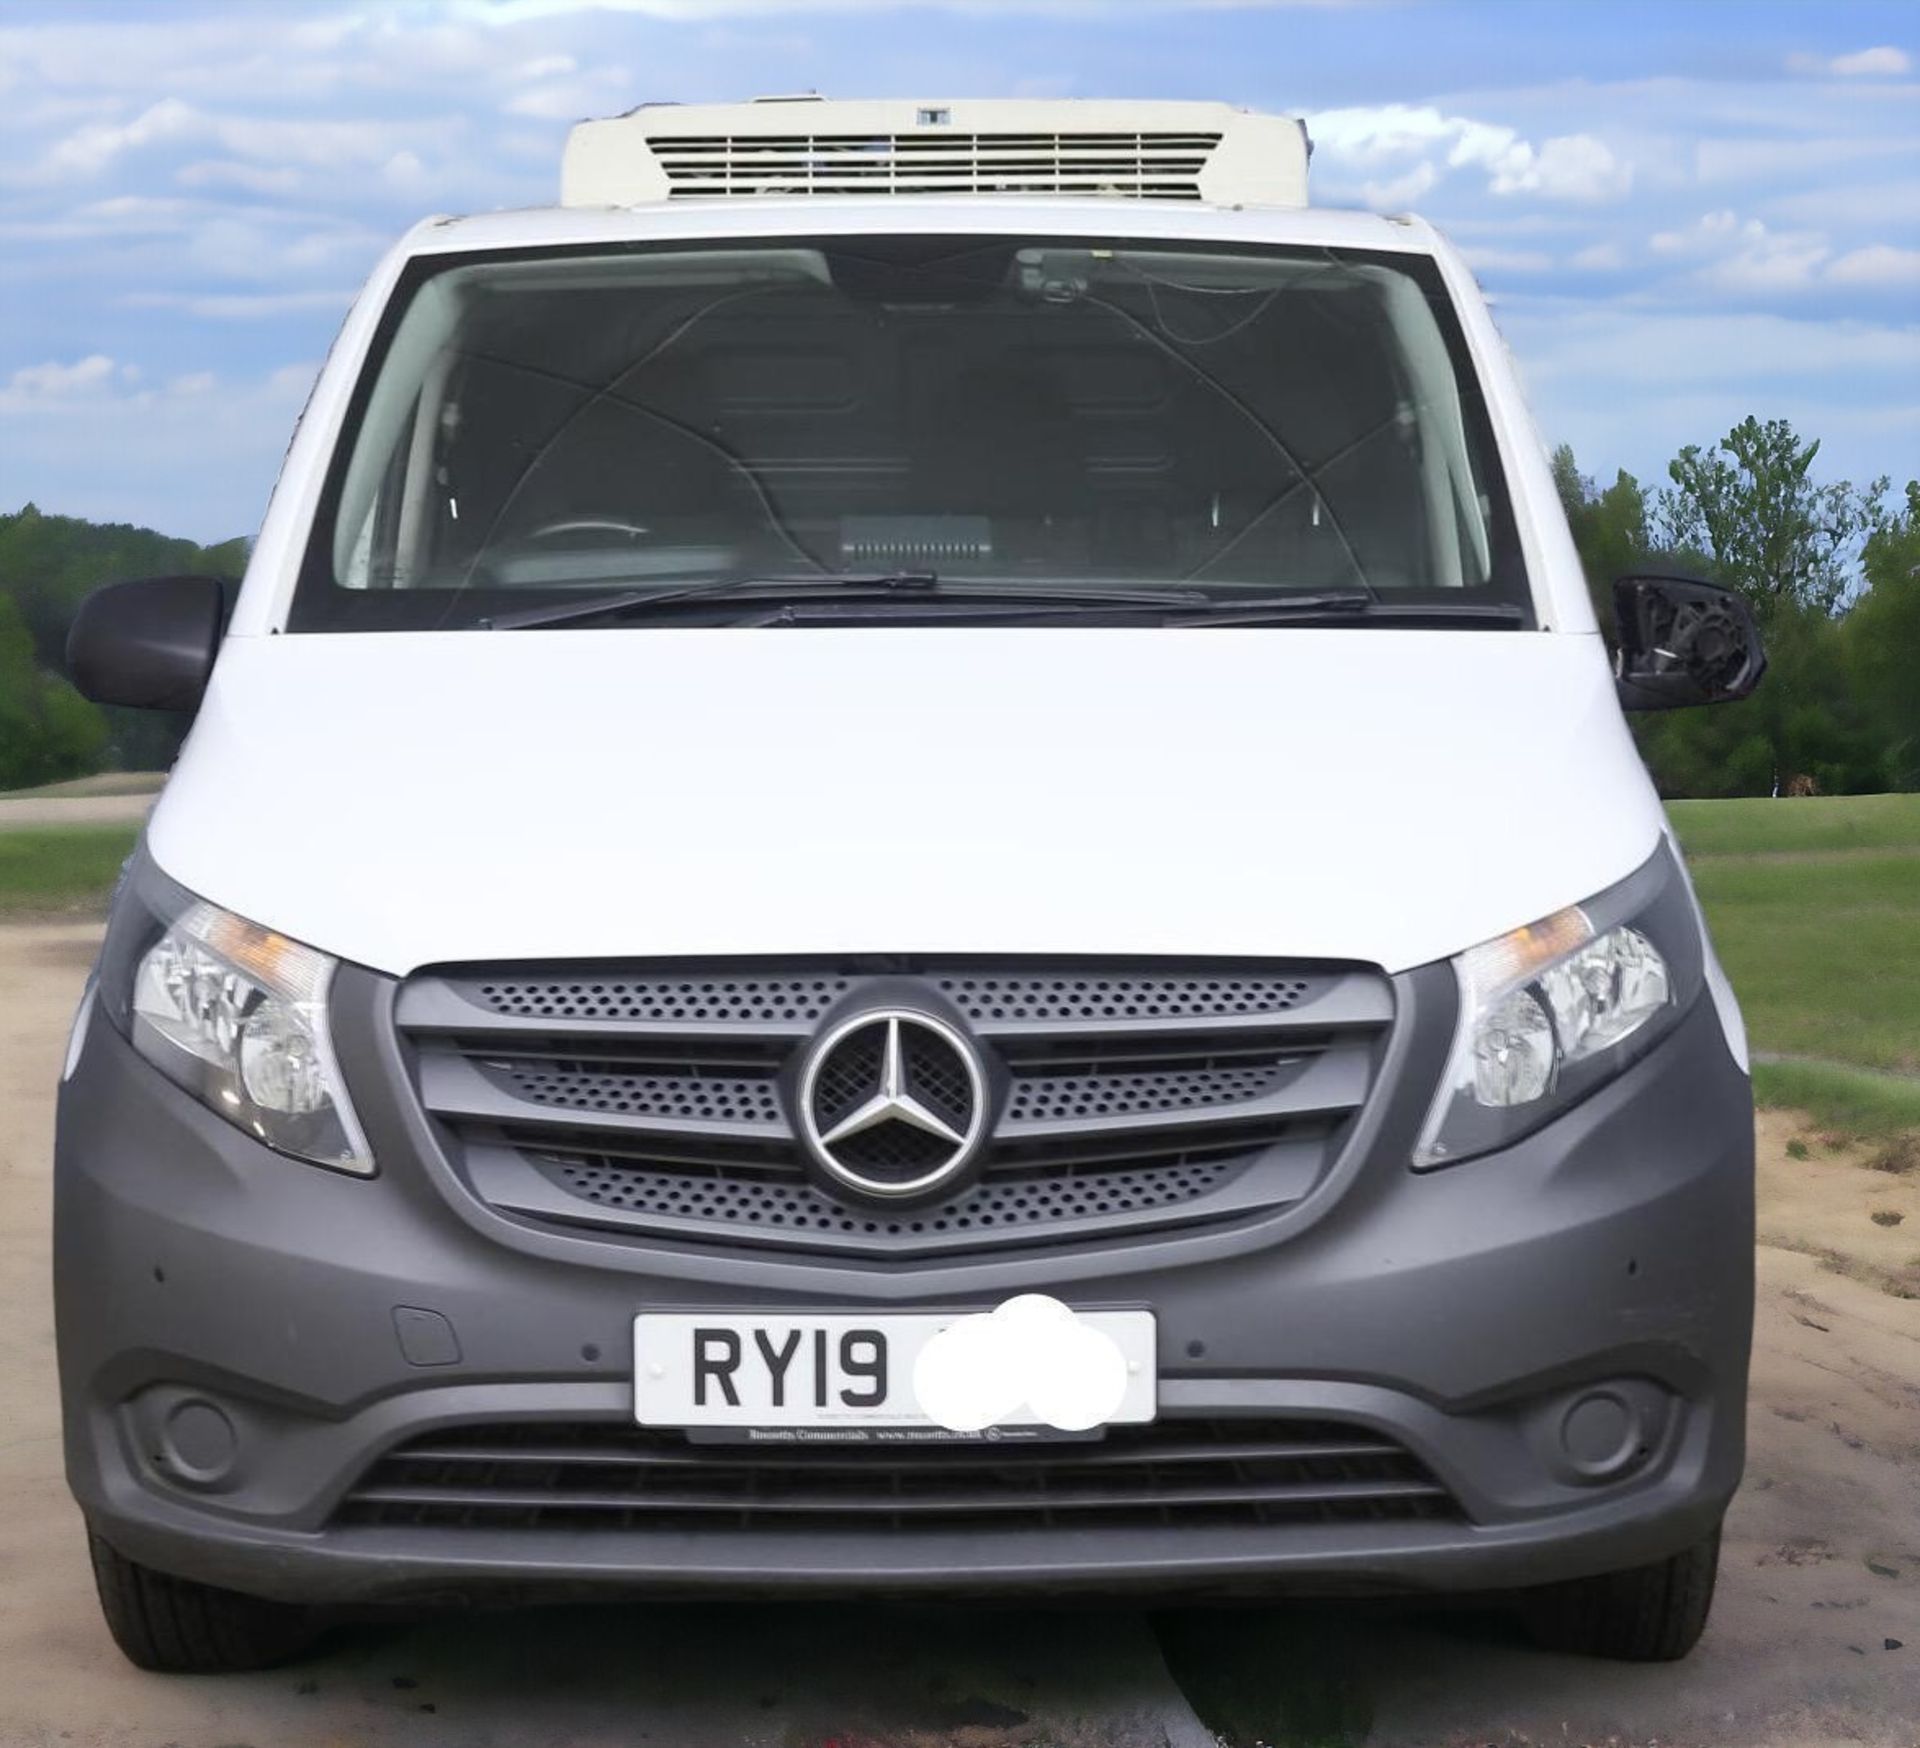 2019 MERCEDES BENZ VITO LWB FRIDGE VAN 114 CDI - YOUR RELIABLE REFRIGERATED SOLUTION - Image 4 of 12